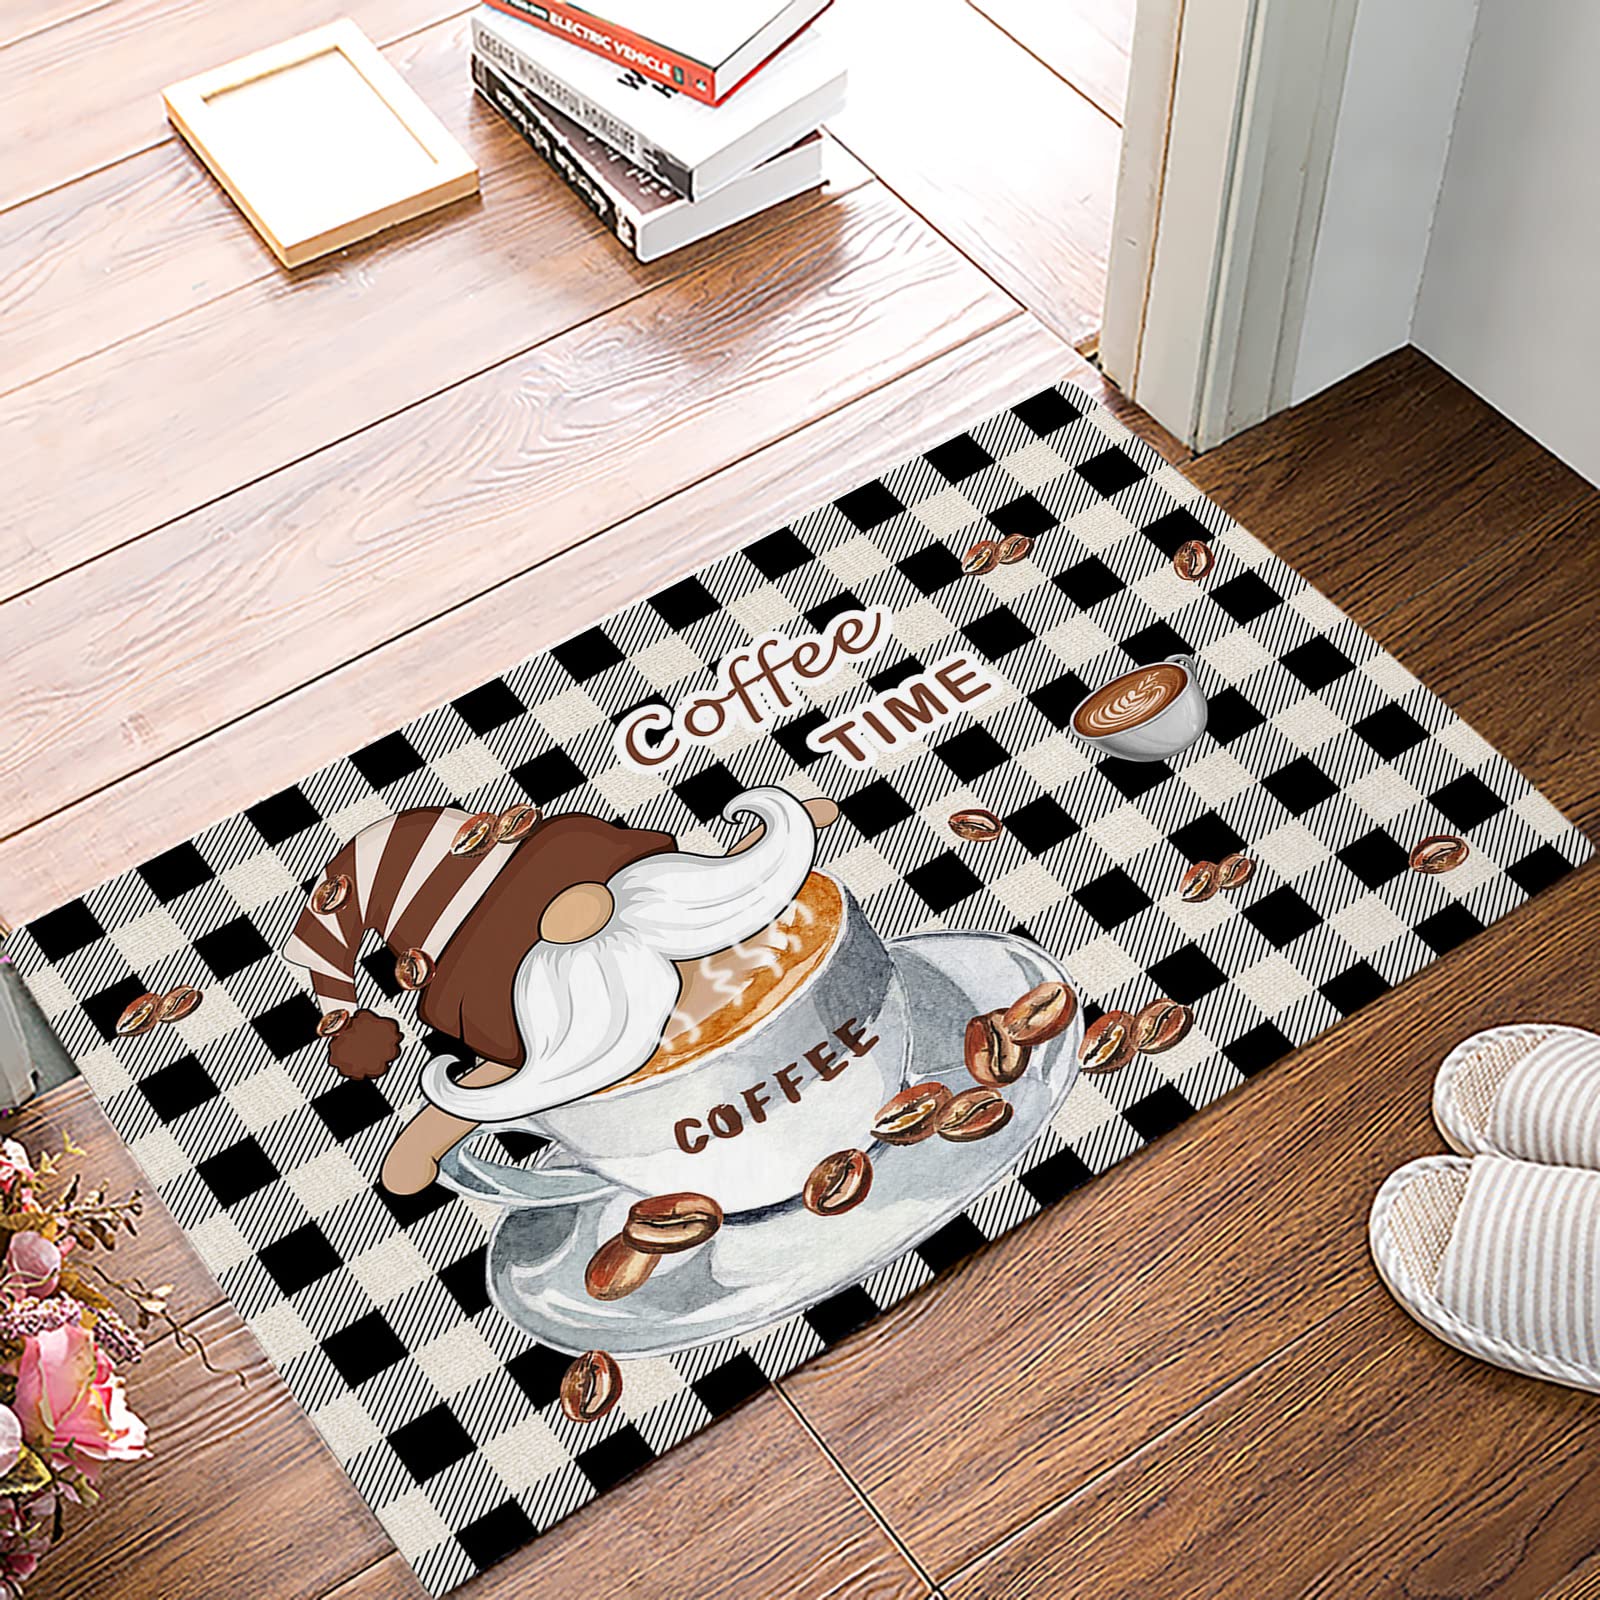 Coffee Gnomes Indoor Doormat Bath Rugs Non Slip, Washable Cover Floor Rug Absorbent Carpets Floor Mat Home Decor for Kitchen Bathroom Bedroom FUUNY Dwarf on Coffee Cup Buffalo Check Plaid 16x24in